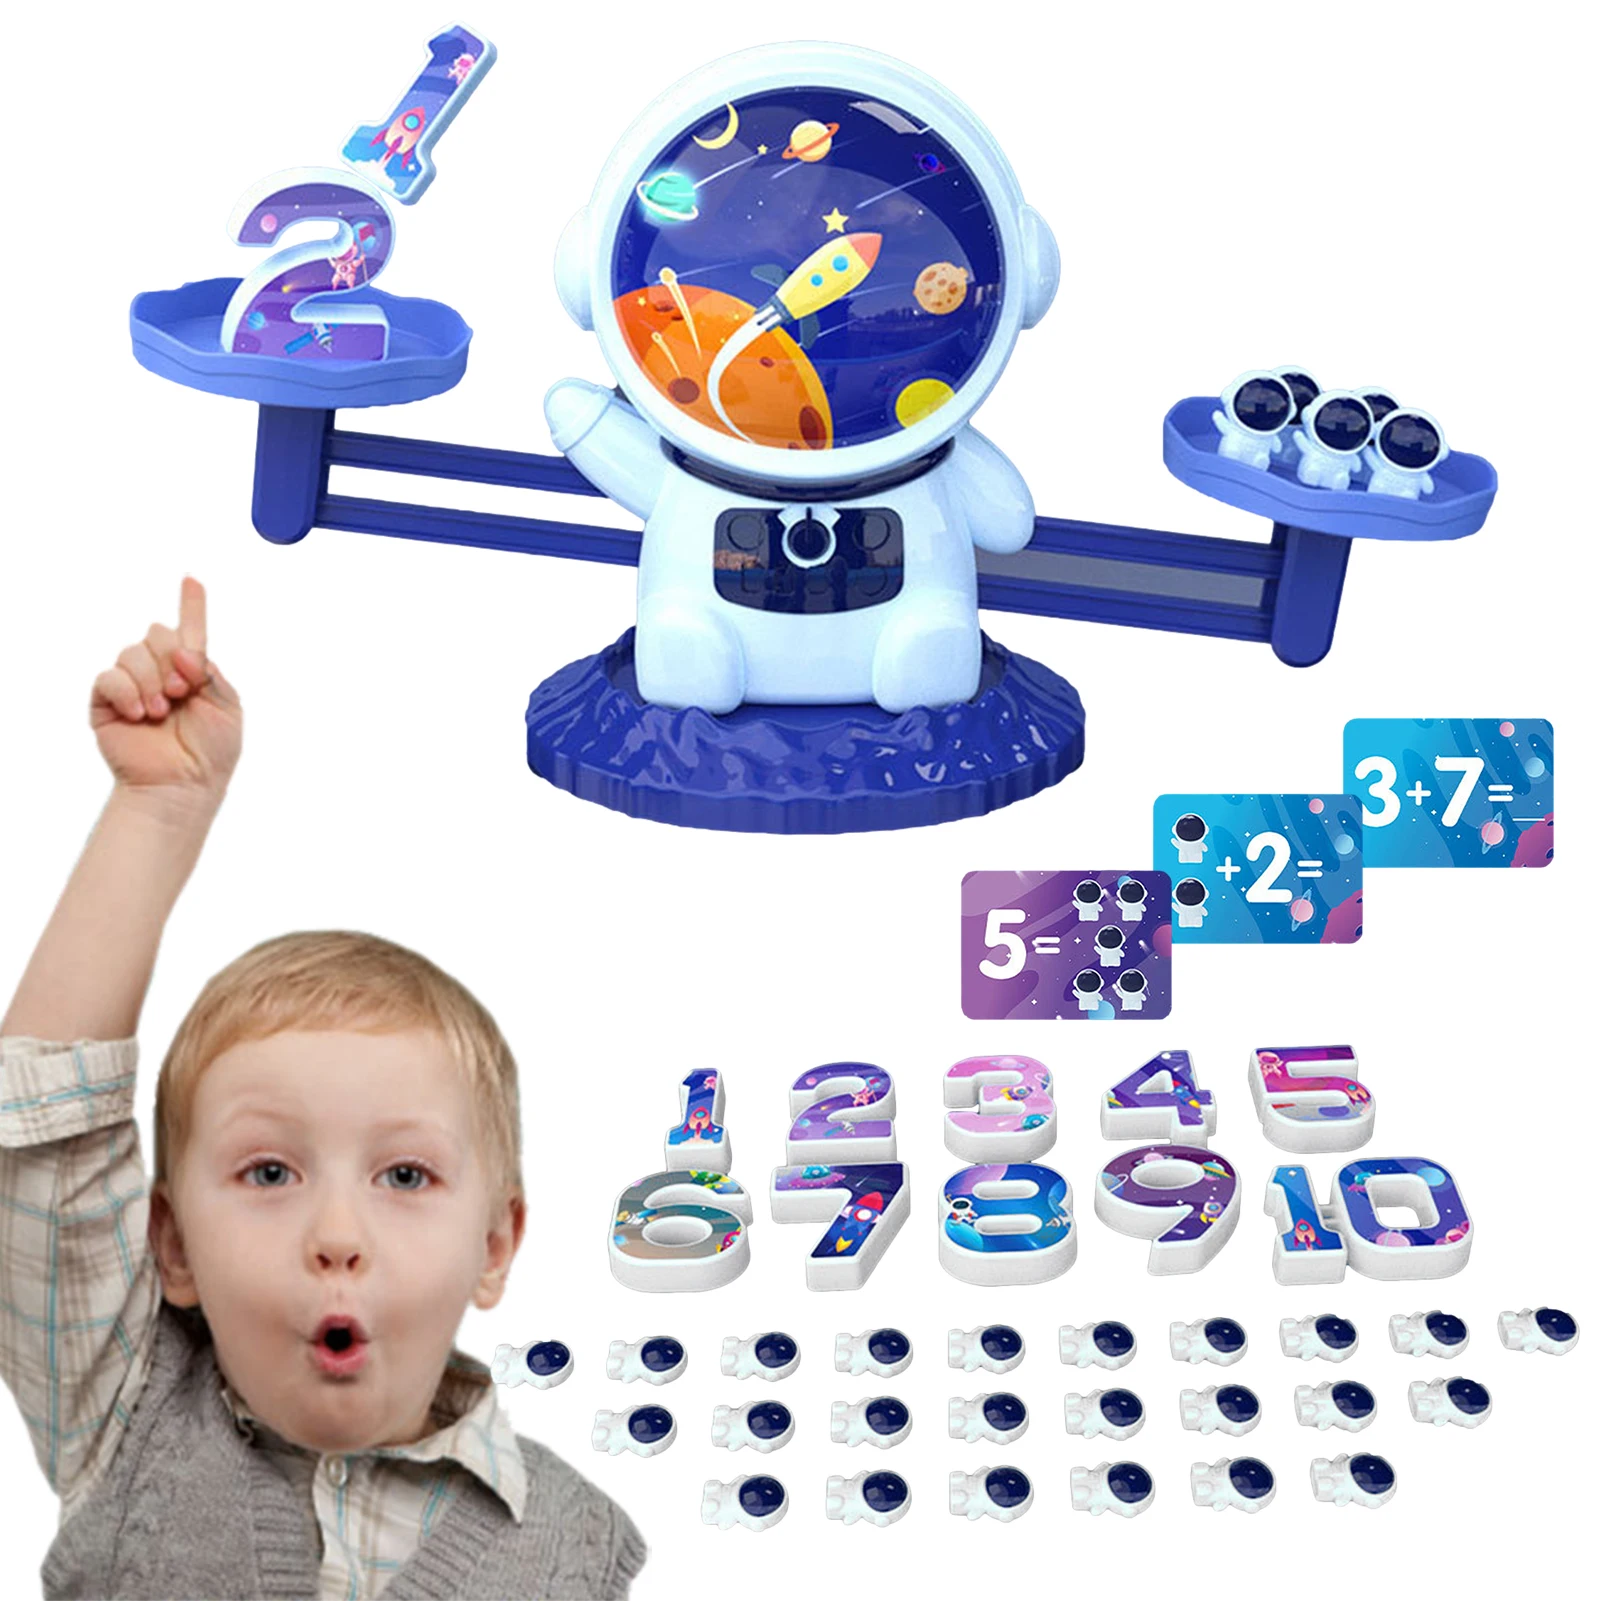 

Cool Math Counting Game Kids Kindergarten Toddler Learning Games Preschool Learning Activities Educational Toys For 5Yeas Old